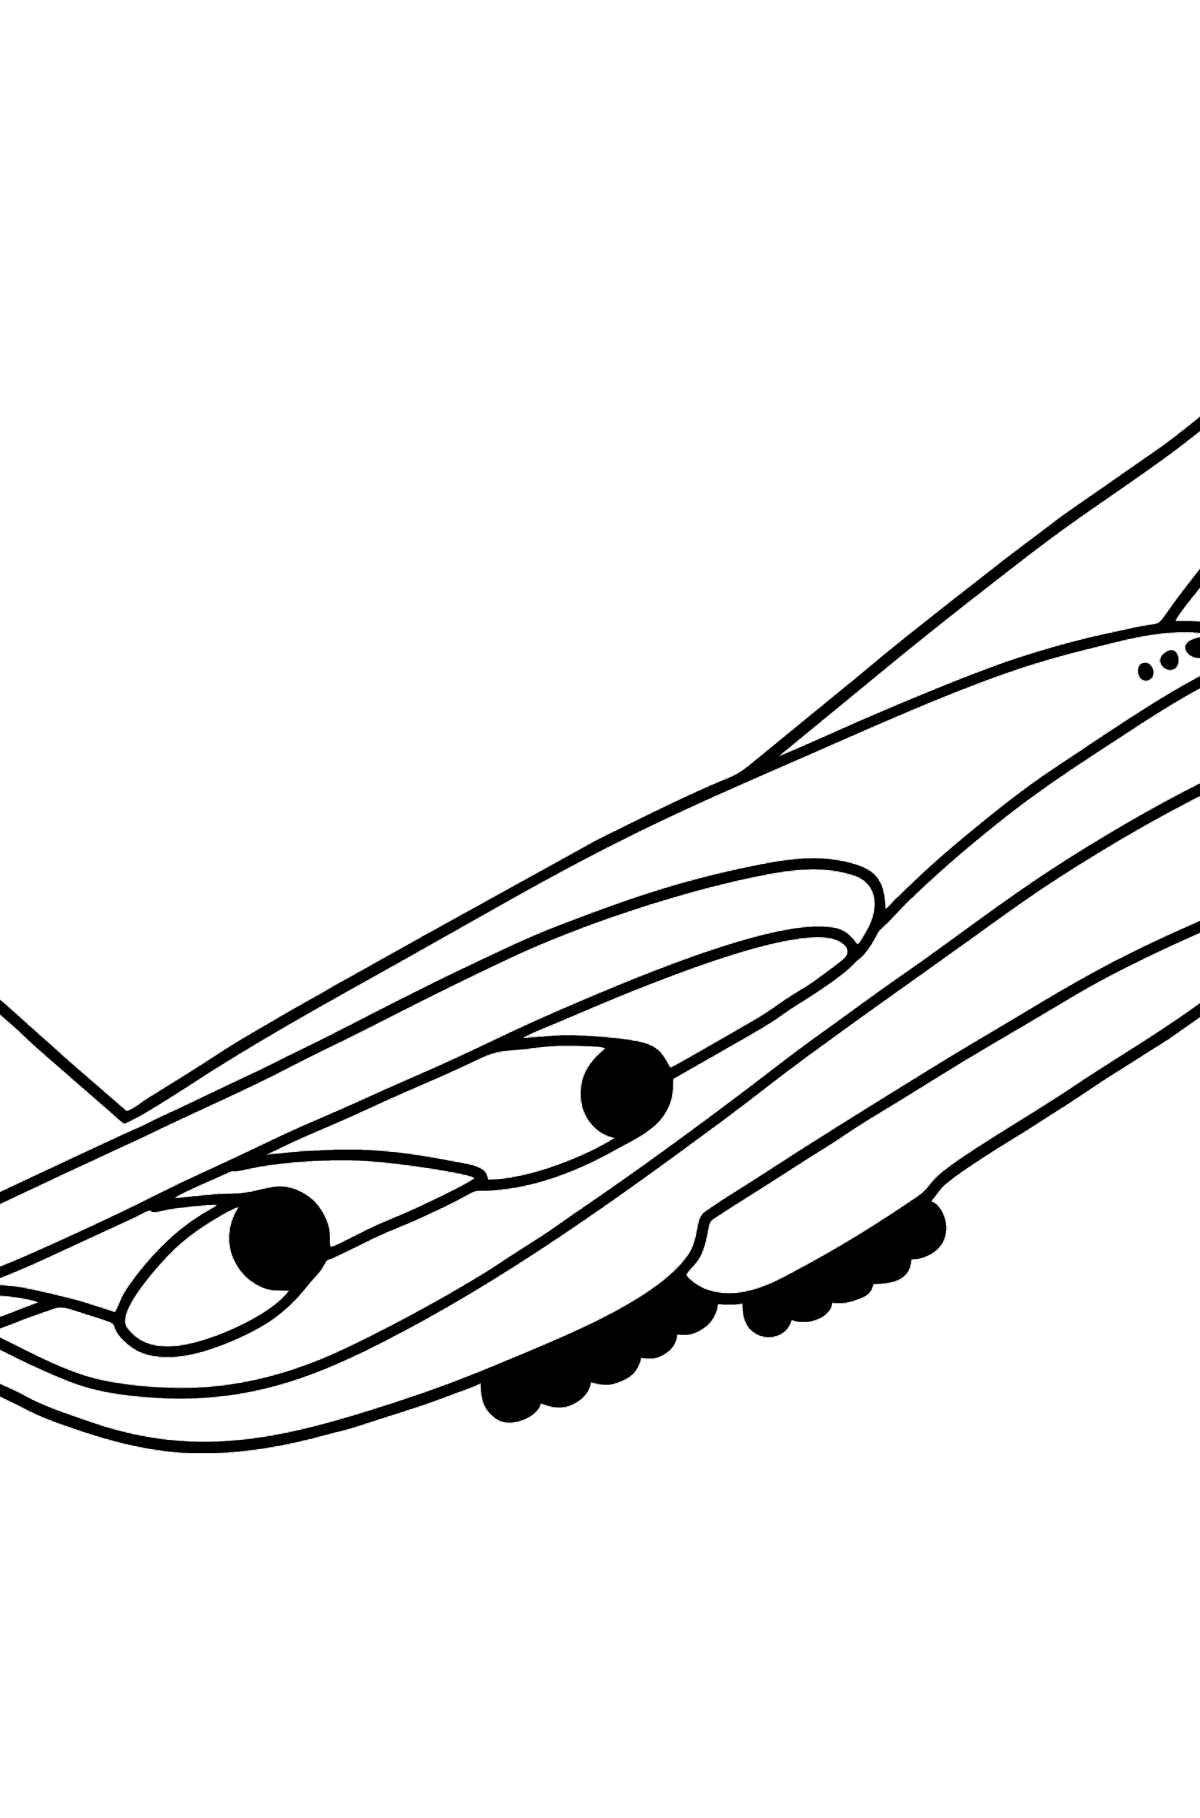 Plane coloring page for Kids - Coloring Pages for Kids